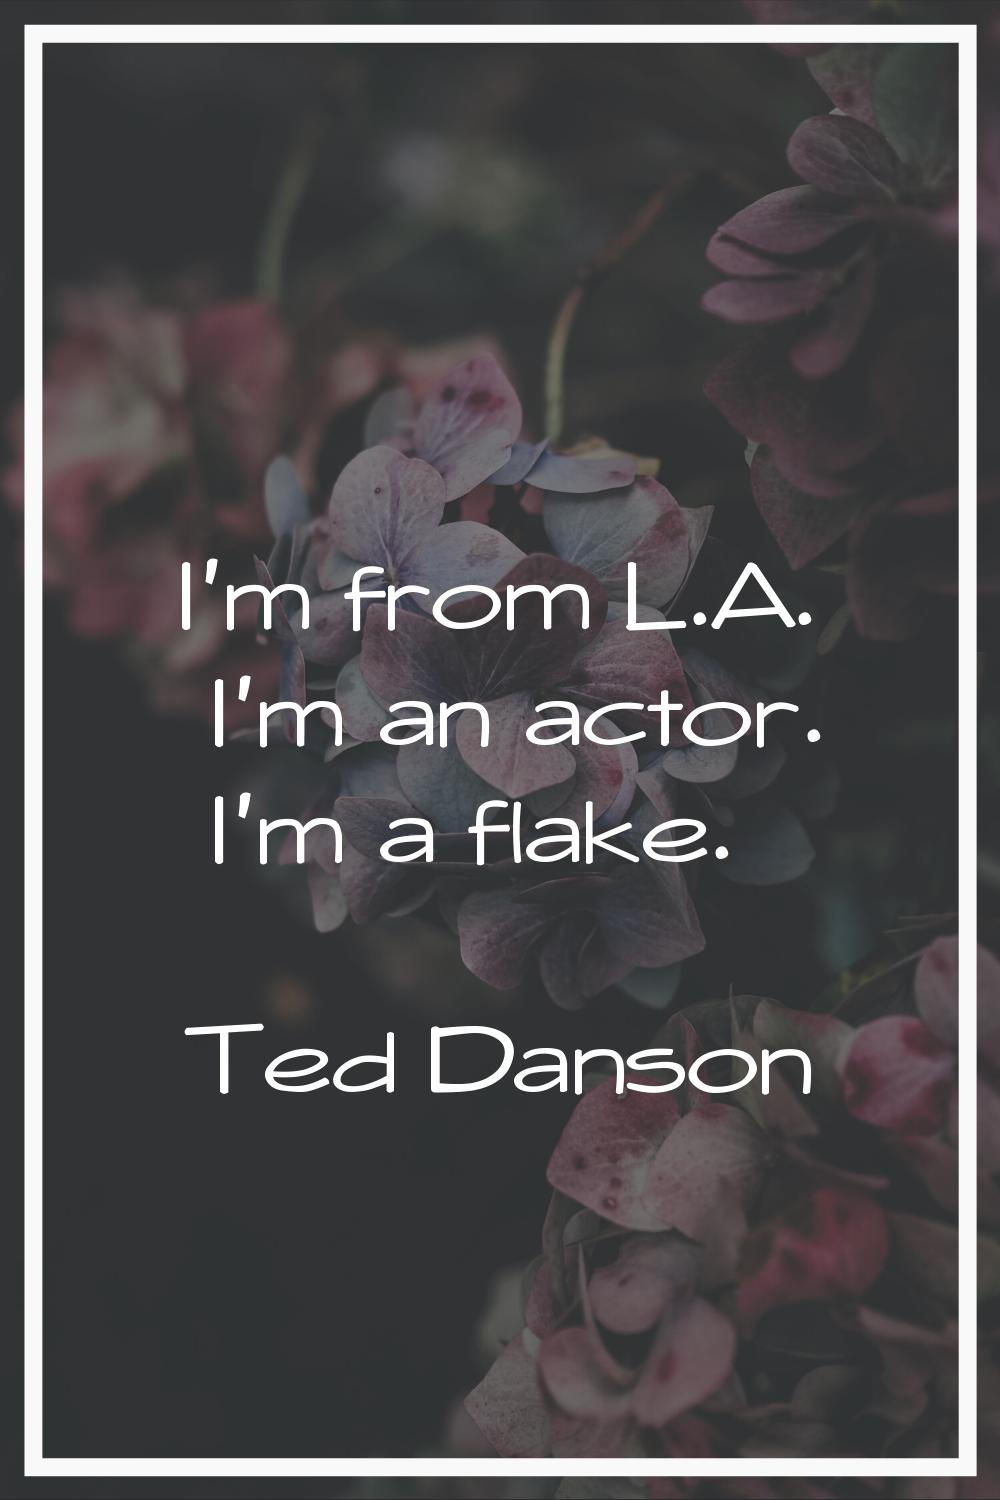 I'm from L.A. I'm an actor. I'm a flake.